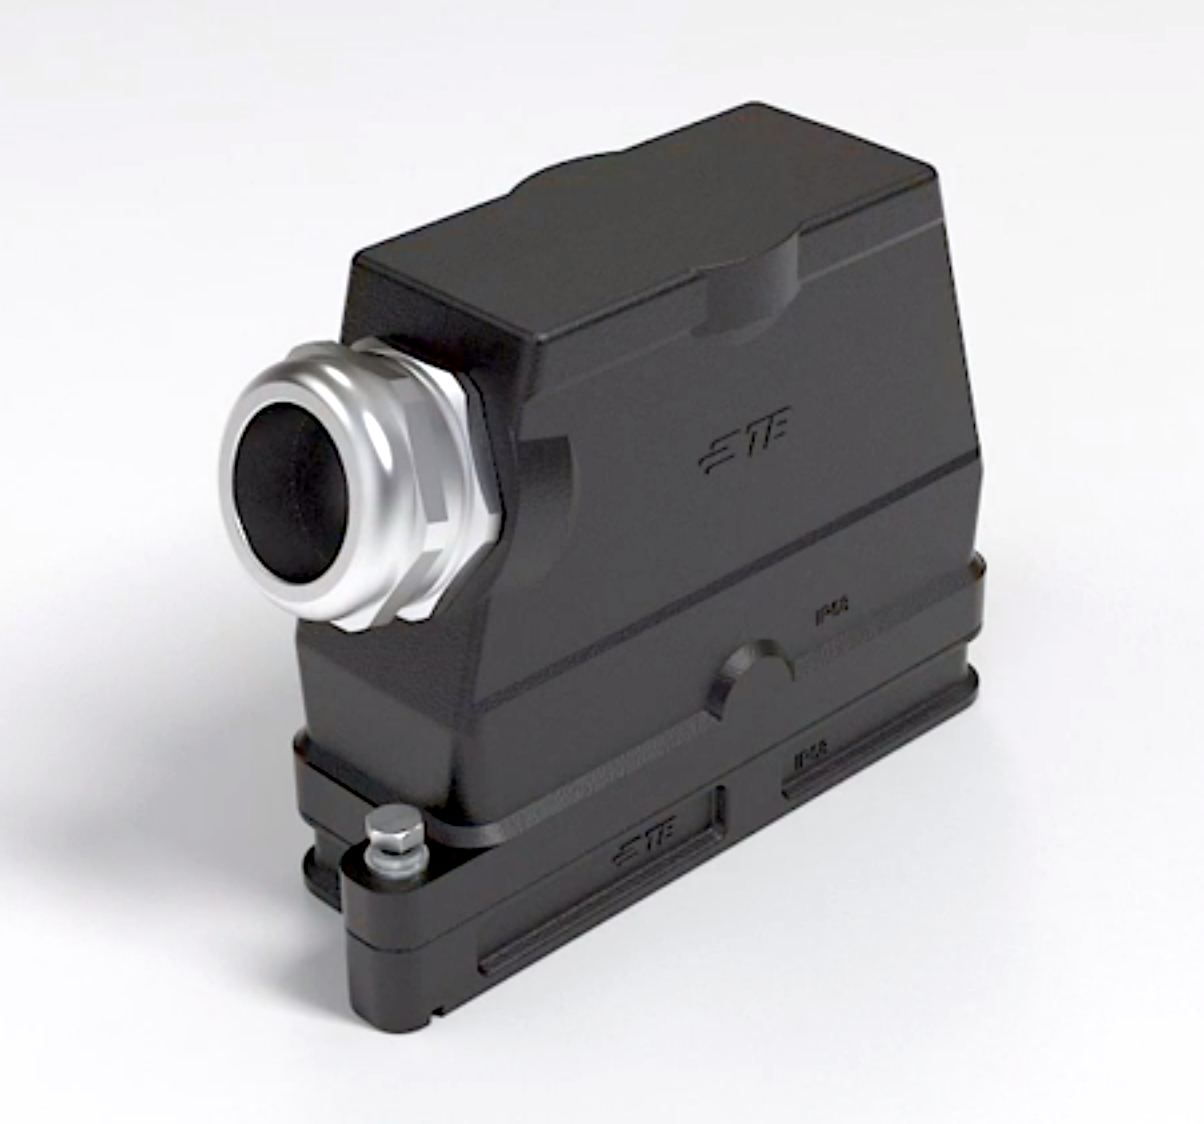 Connector Products for Energy Applications: TE Connectivity’s HCM Series connectors from Newark element14